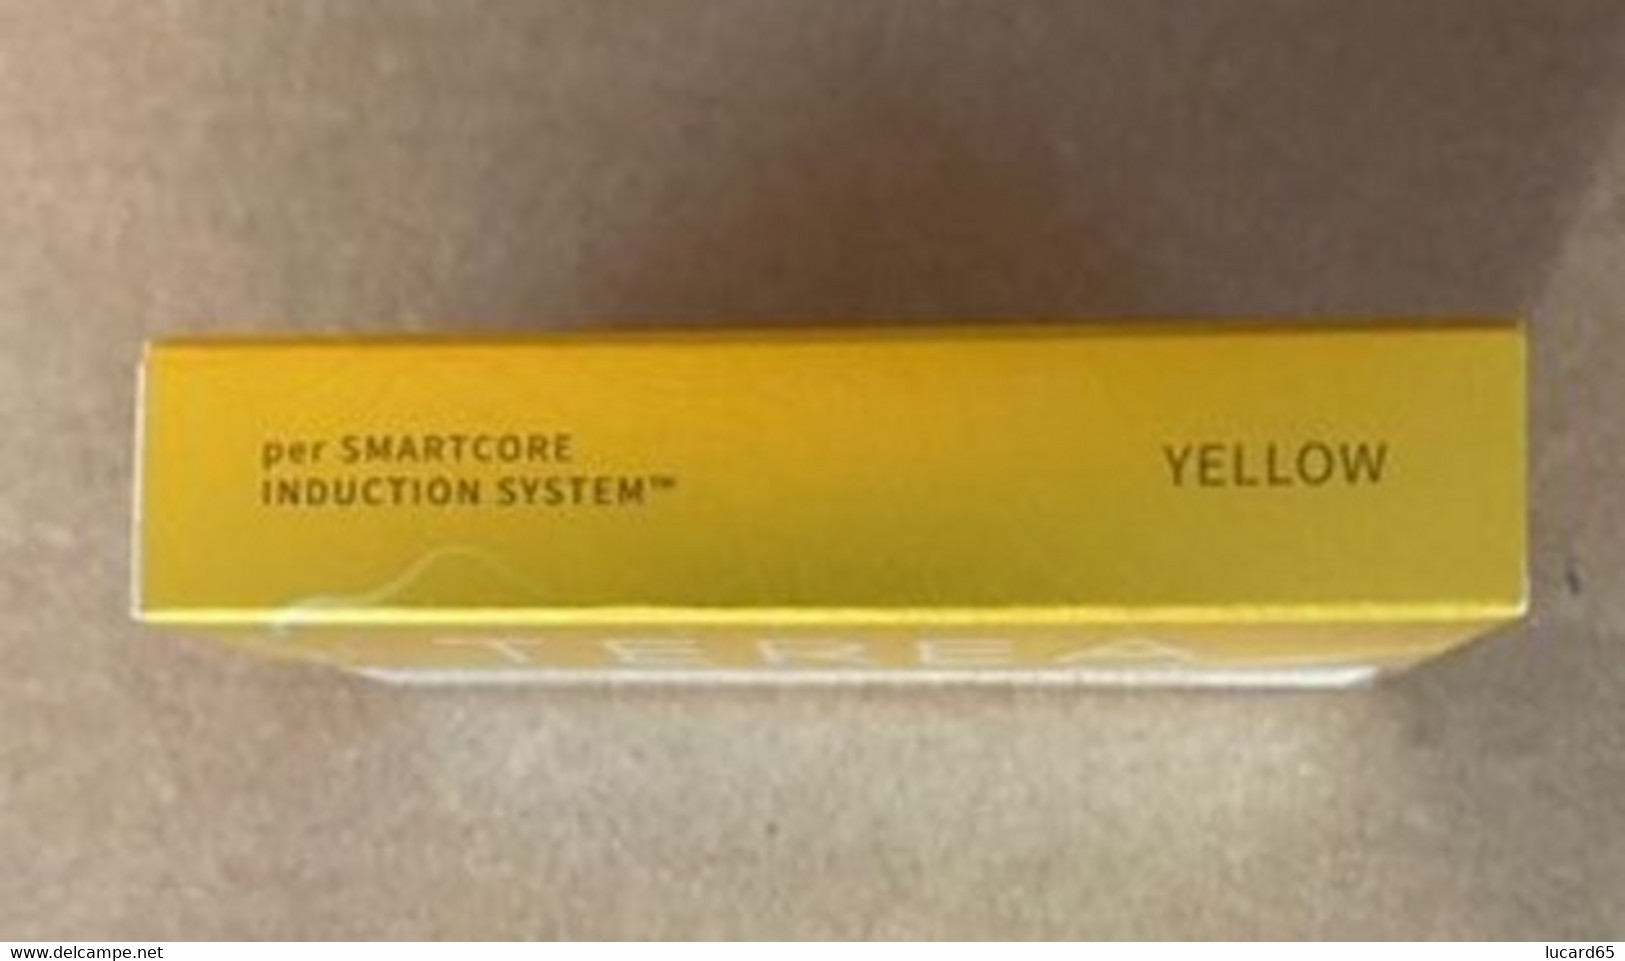 Empty Tobacco boxes - TABACCO - TEREA YELLOW - EMPTY PACK ITALY